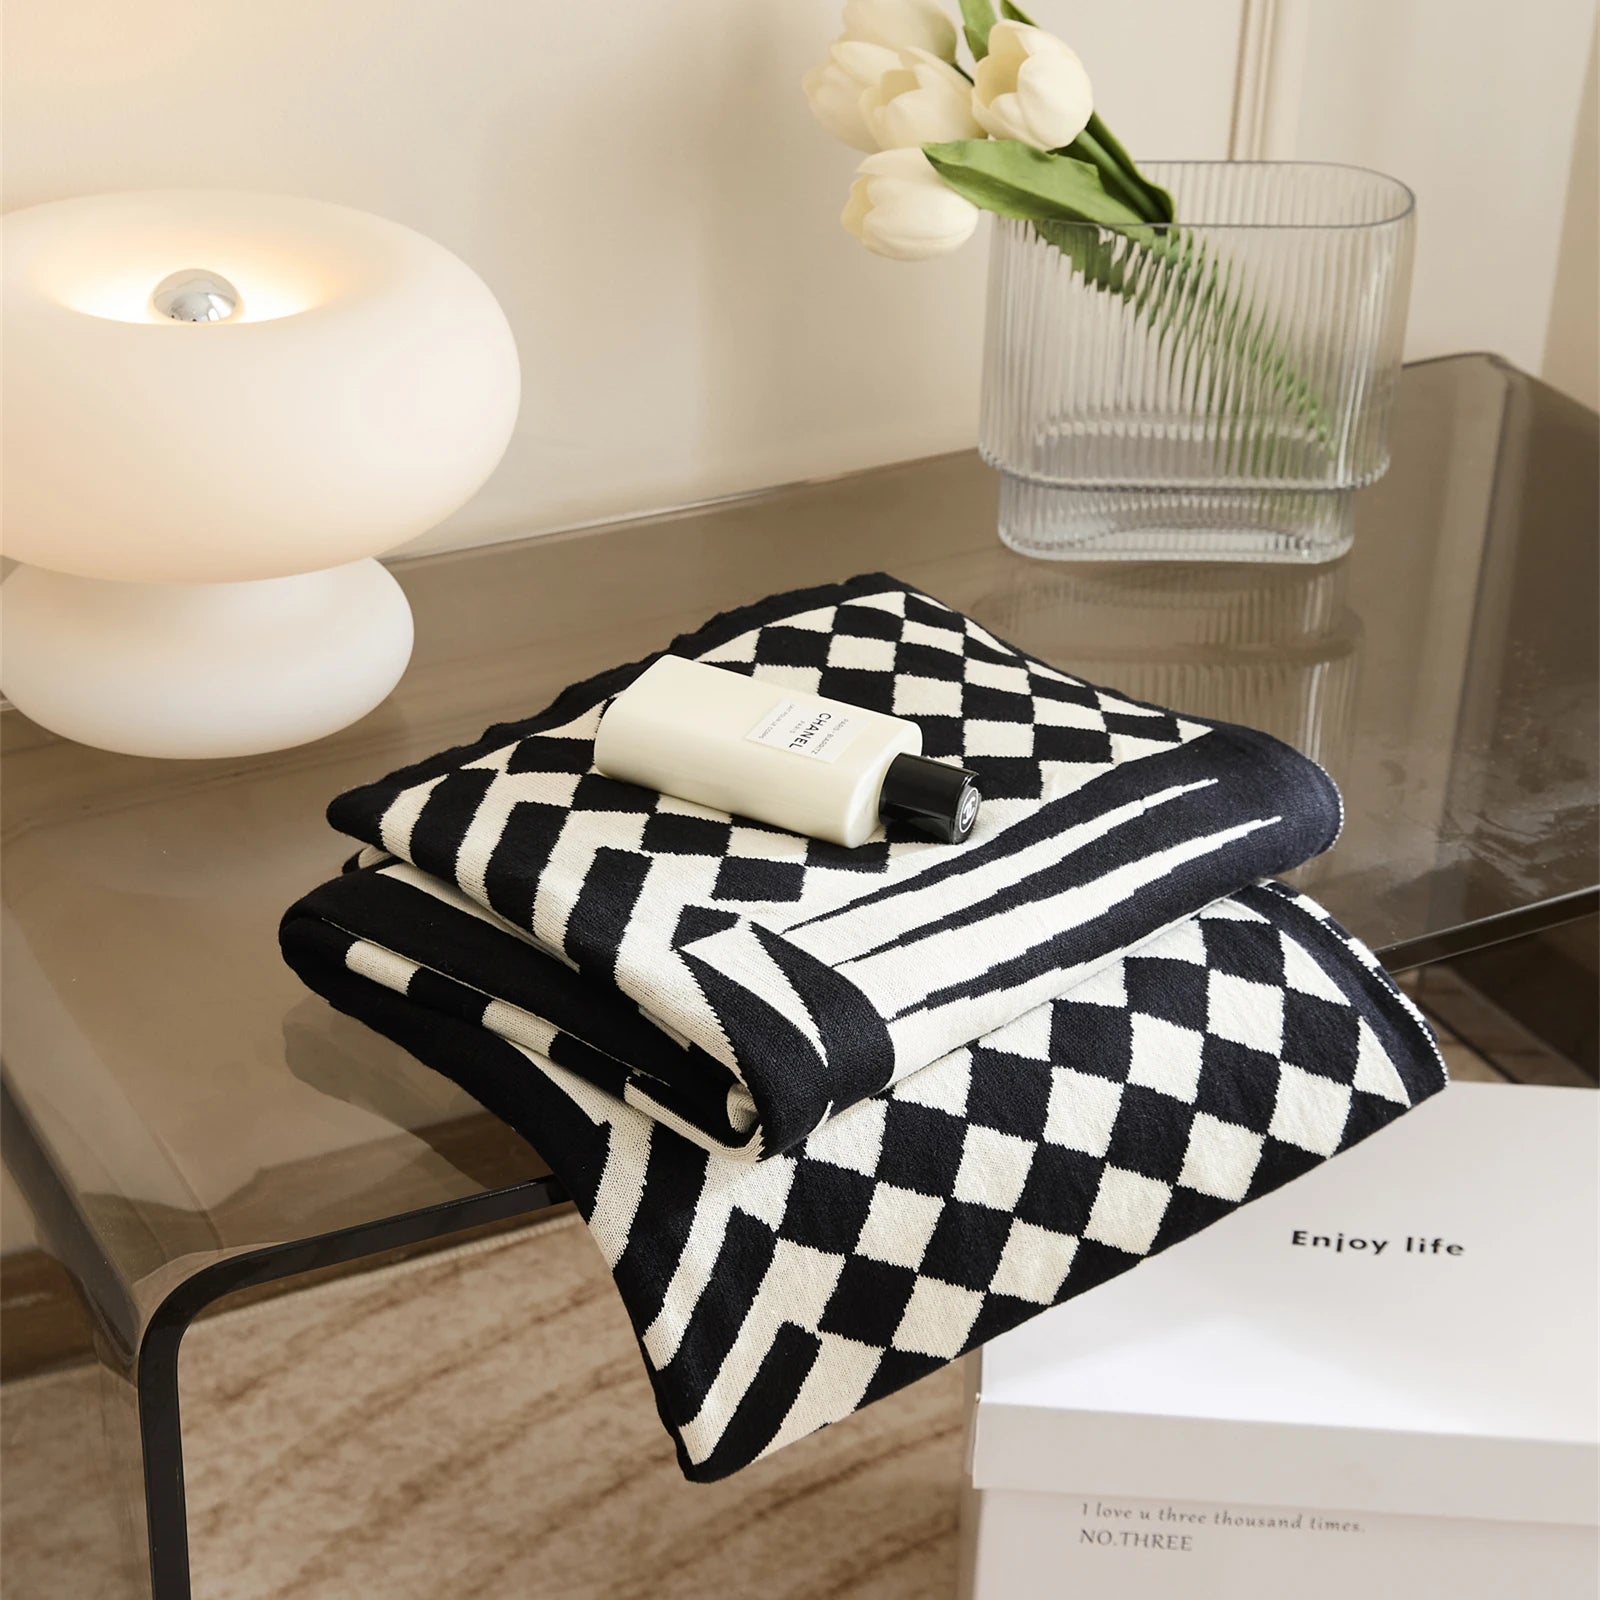 Tribal patterned black and white premium cotton throw blanket 